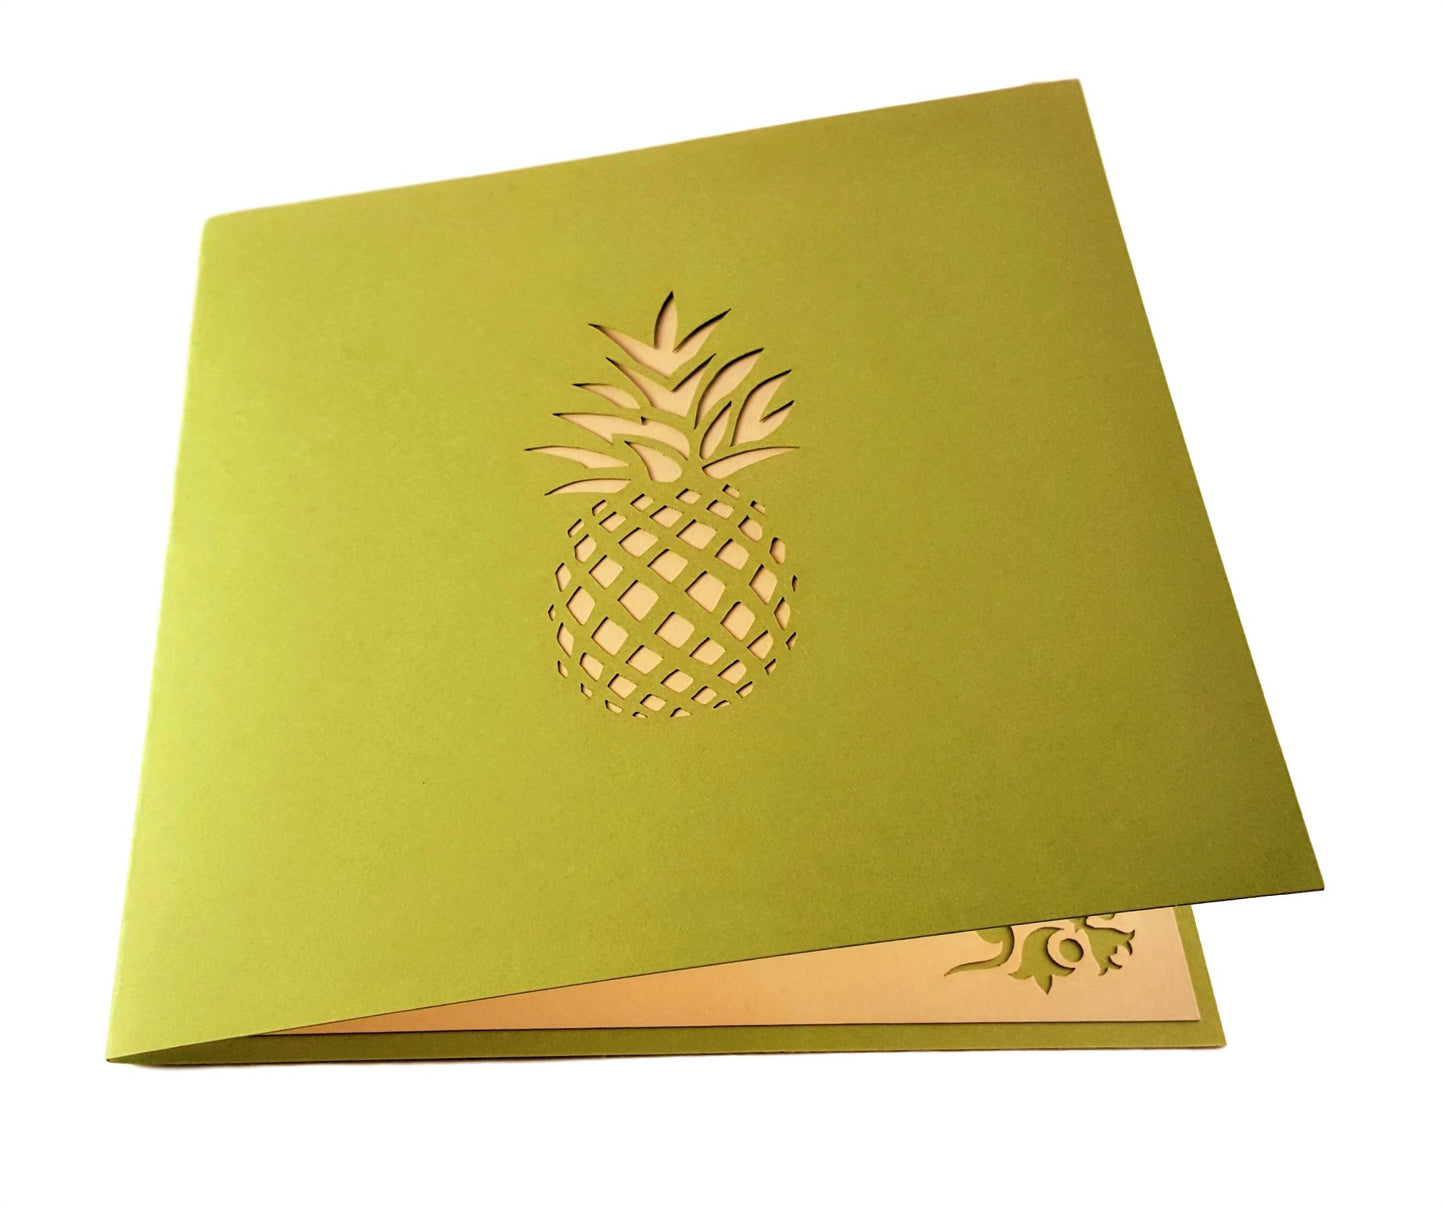 Pineapple 3D Pop Up Greeting Card - Get Well - Just Because - Love - Special Days - Thank You - iGifts And Cards